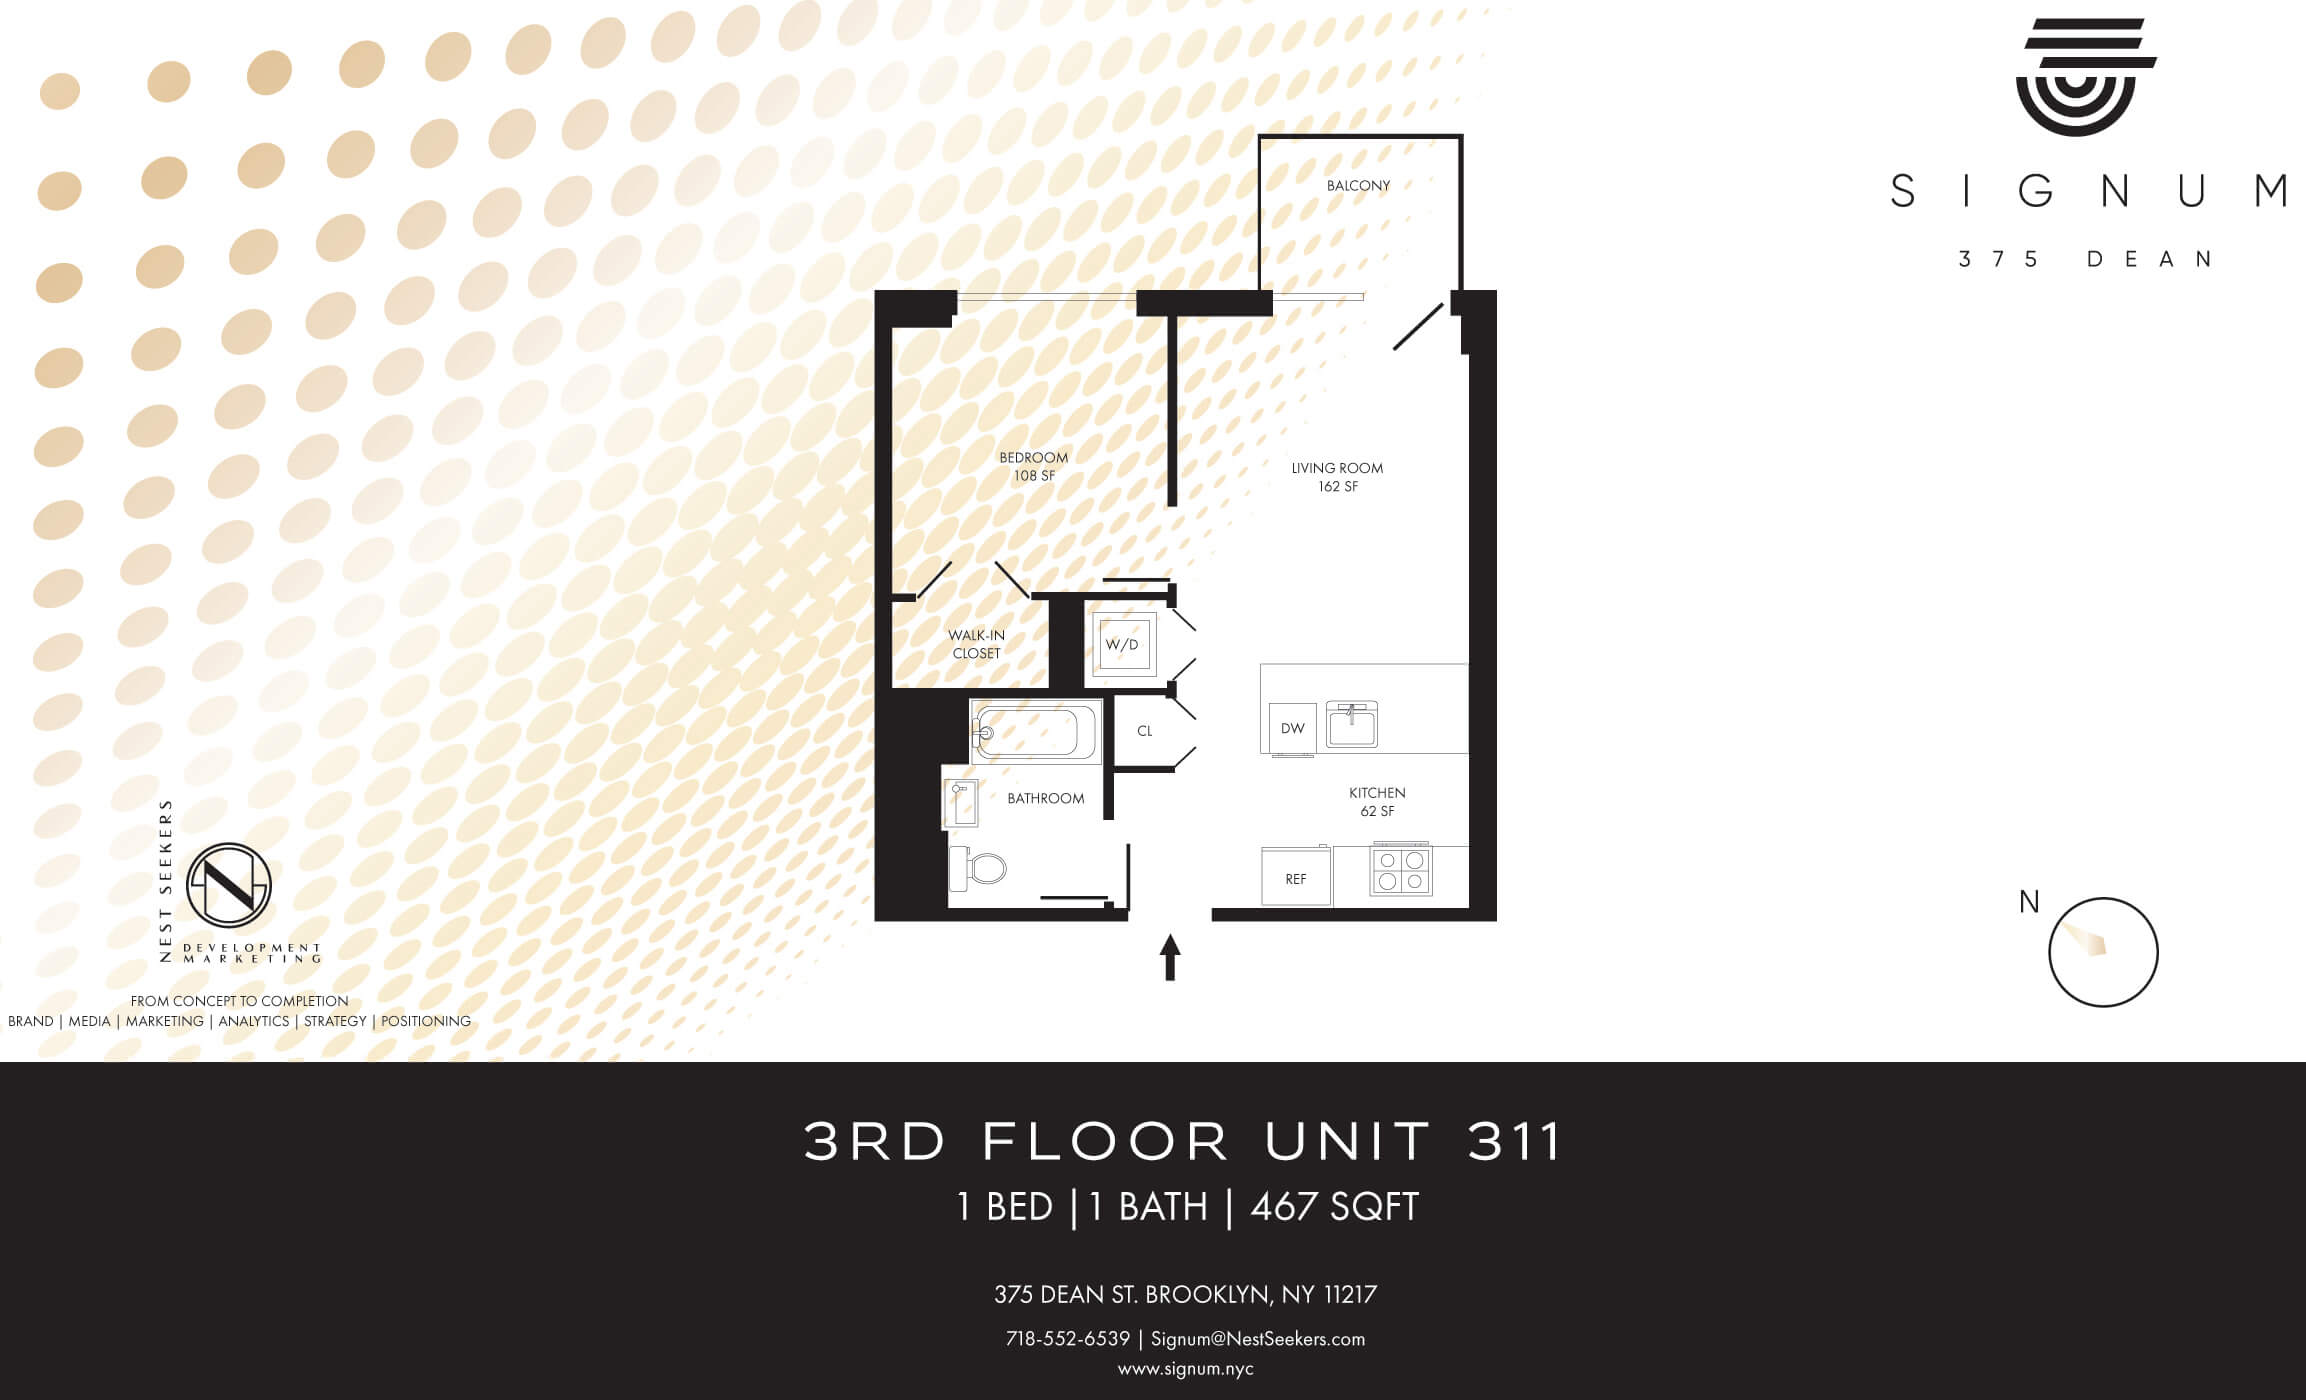 floor plan showing a one bedroom unit with a balcony